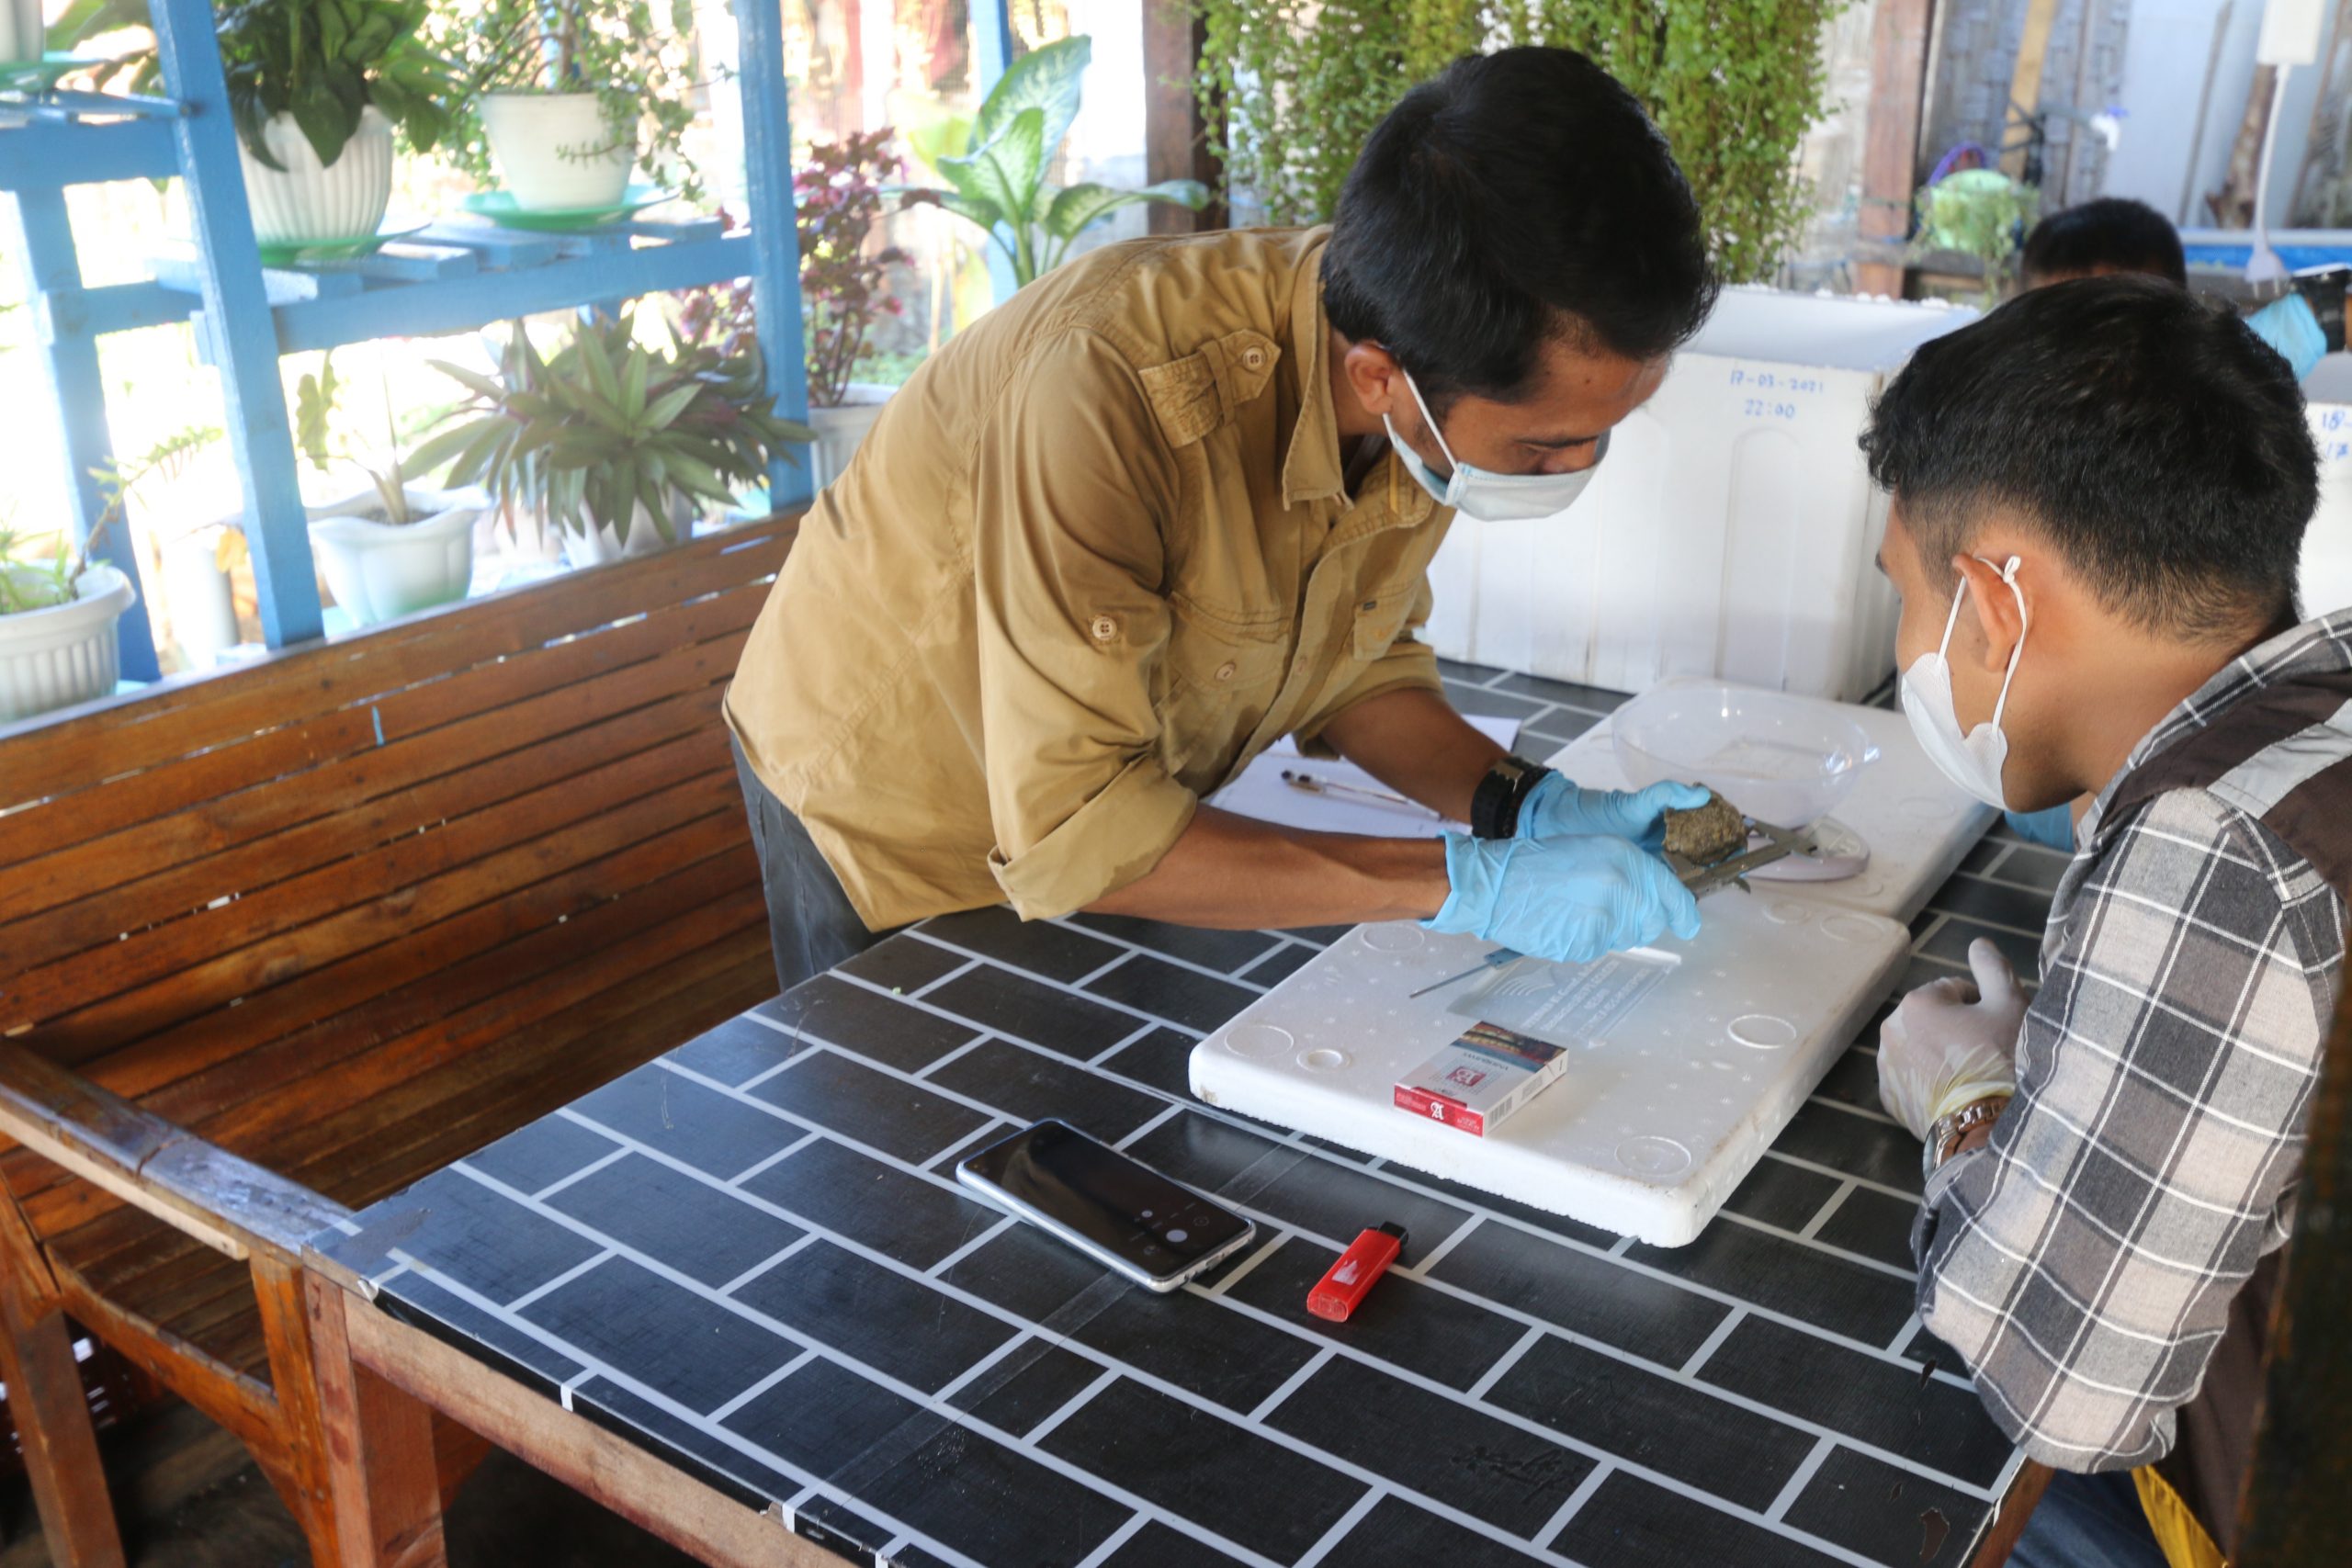 Measuring the size and weight of hatchling © Satucita Foundation